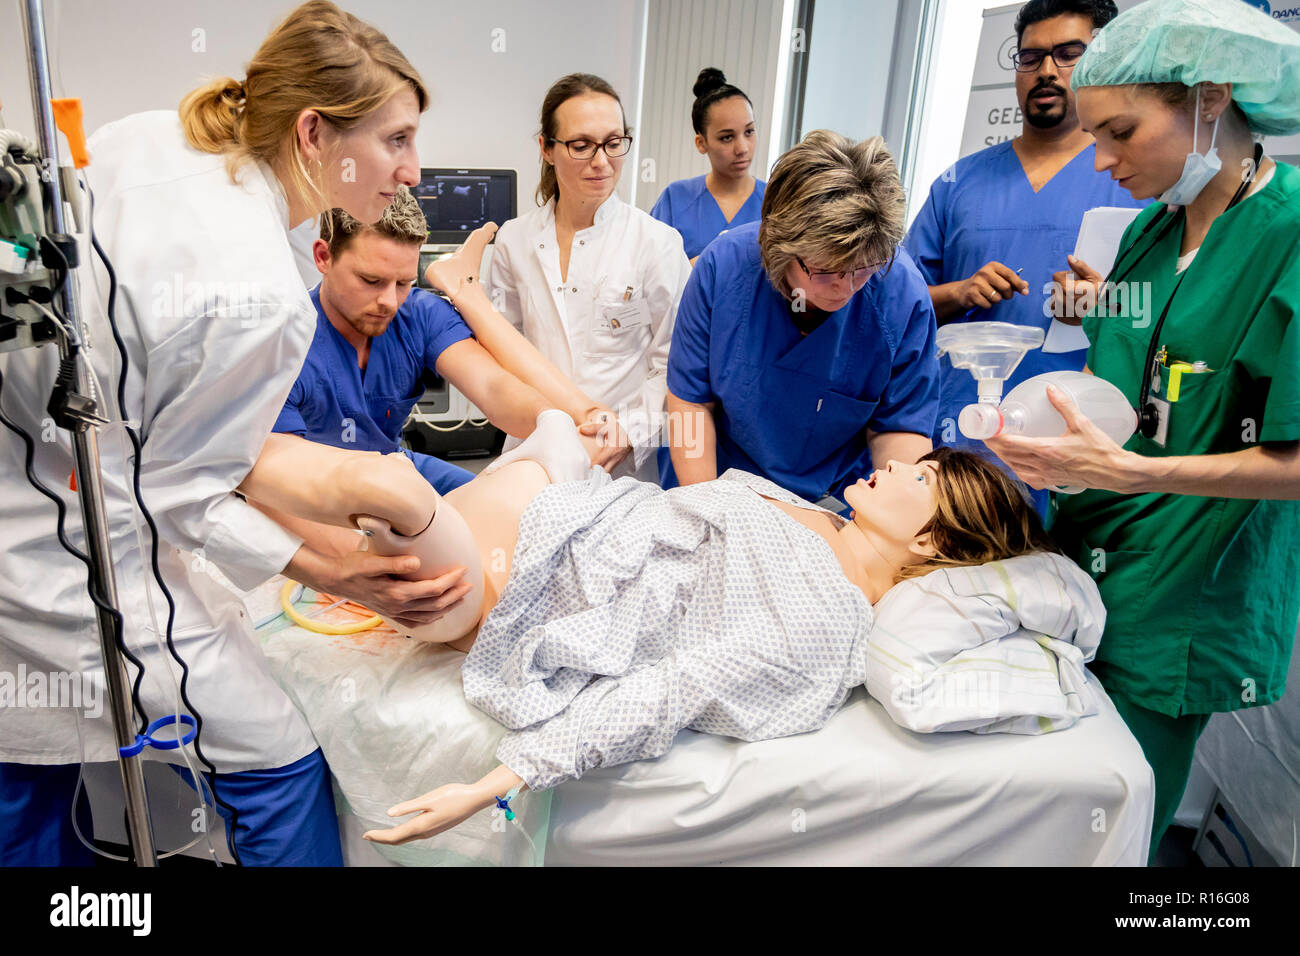 https://c8.alamy.com/comp/R16G08/berlin-germany-09th-nov-2018-employees-of-the-charit-clinic-for-obstetrics-practice-the-treatment-of-peri-postpartum-bleeding-with-a-birth-simulation-manikin-with-the-simulation-dummy-junior-doctors-and-midwives-at-the-charit-can-train-the-processes-involved-in-childbirth-credit-christoph-soederdpaalamy-live-news-R16G08.jpg